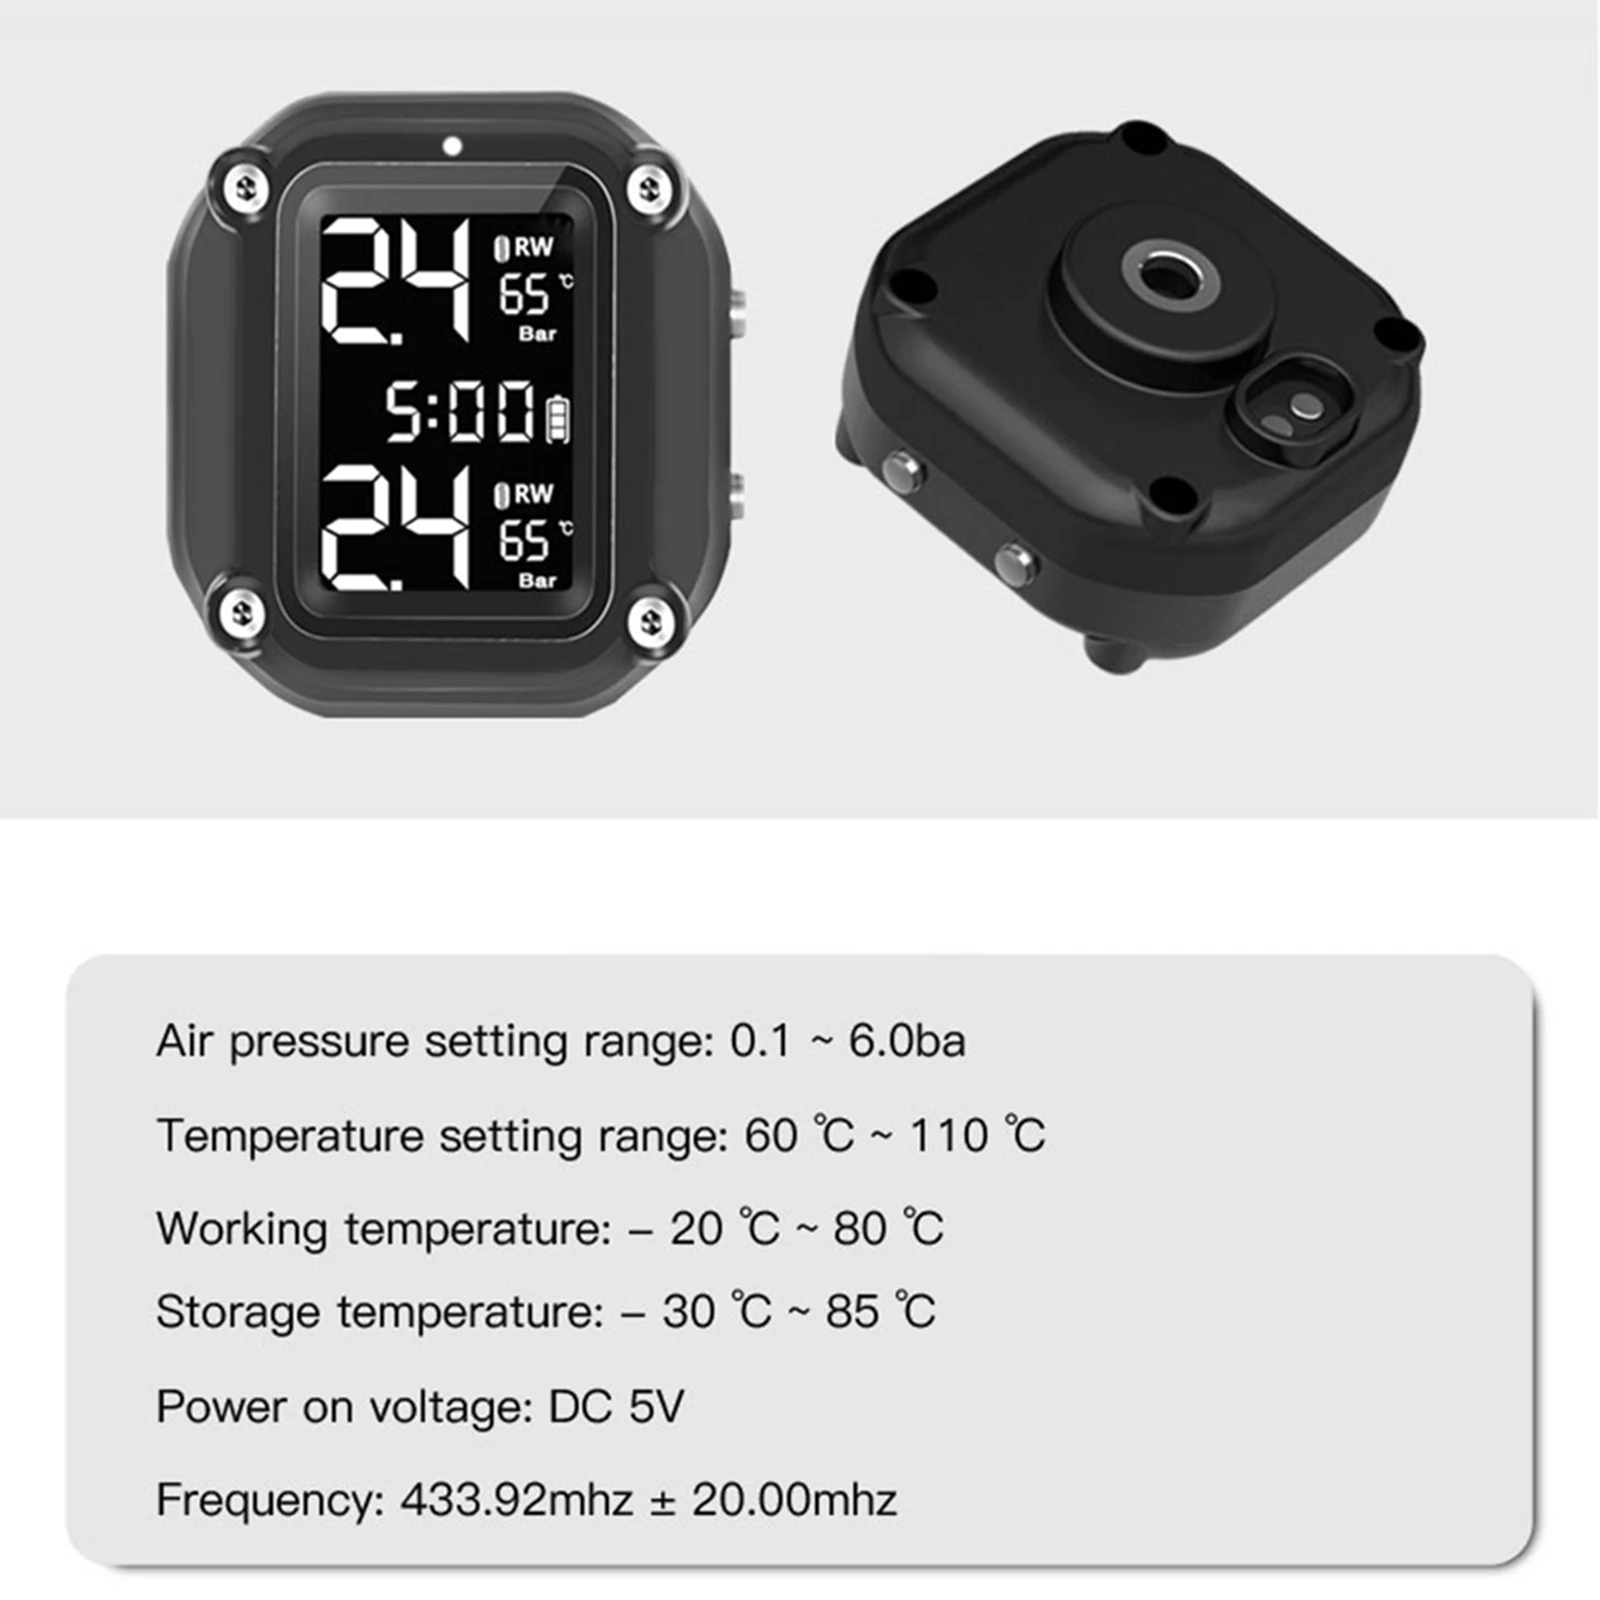 Motorcycle Electronic TPMS Wireless Tire Pressure Monitoring System, High Accuracy, Necessary Alarm System